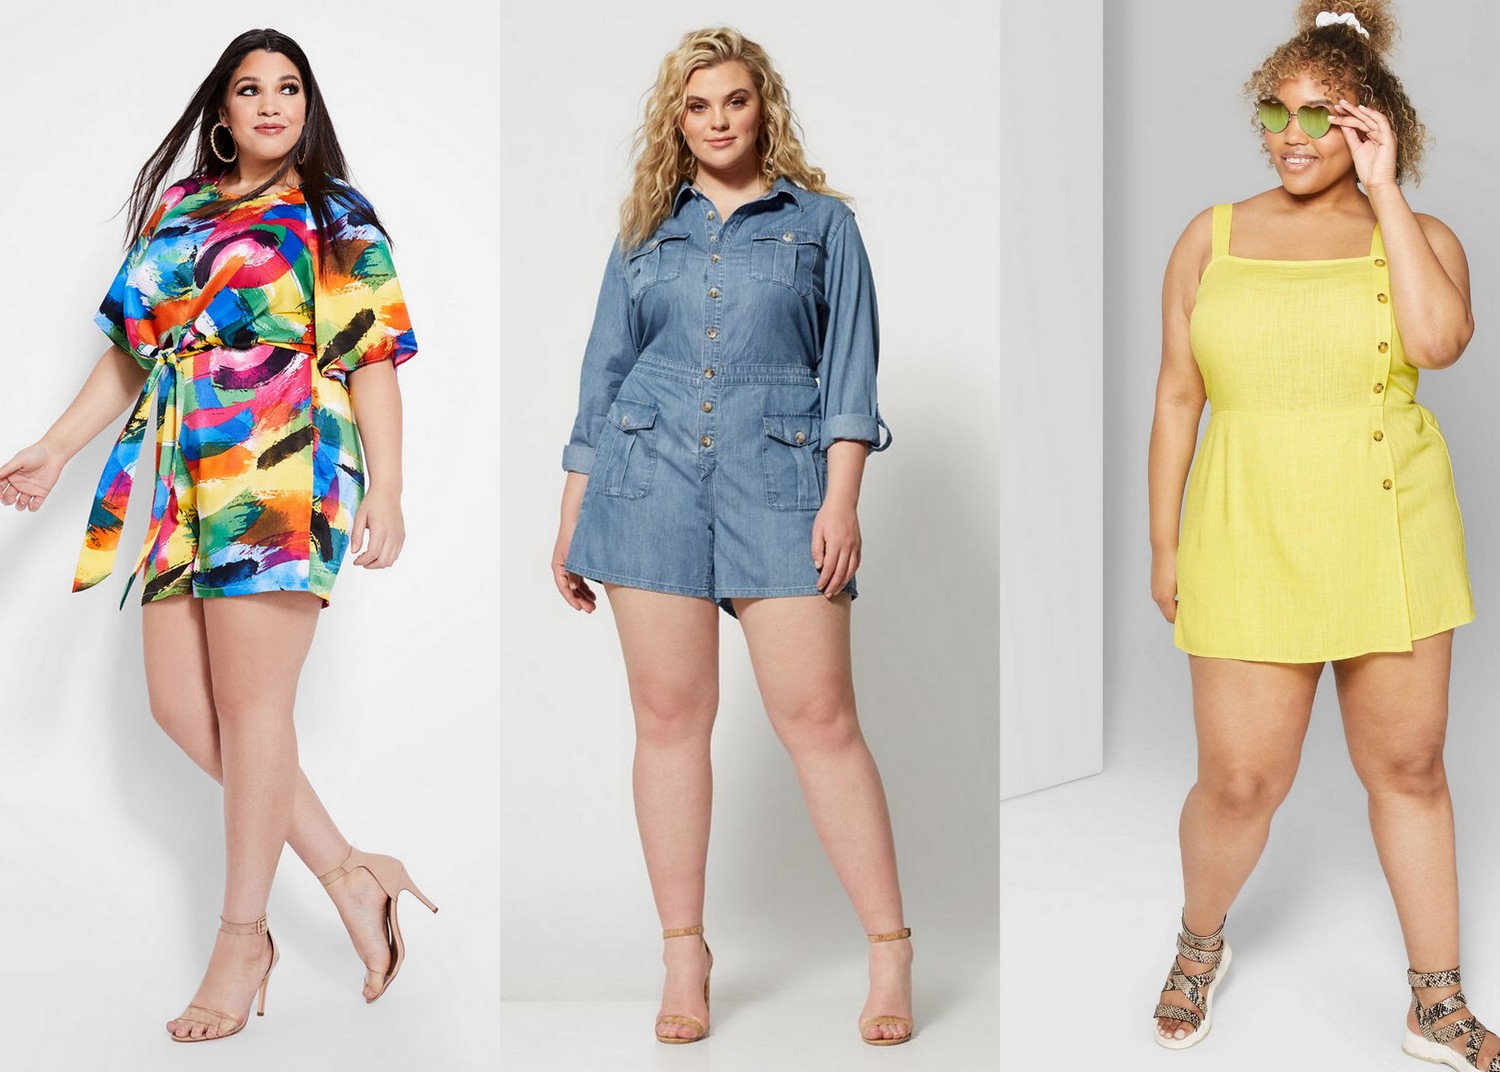 Shop These Plus Size Romper Finds to Break Out of Safe